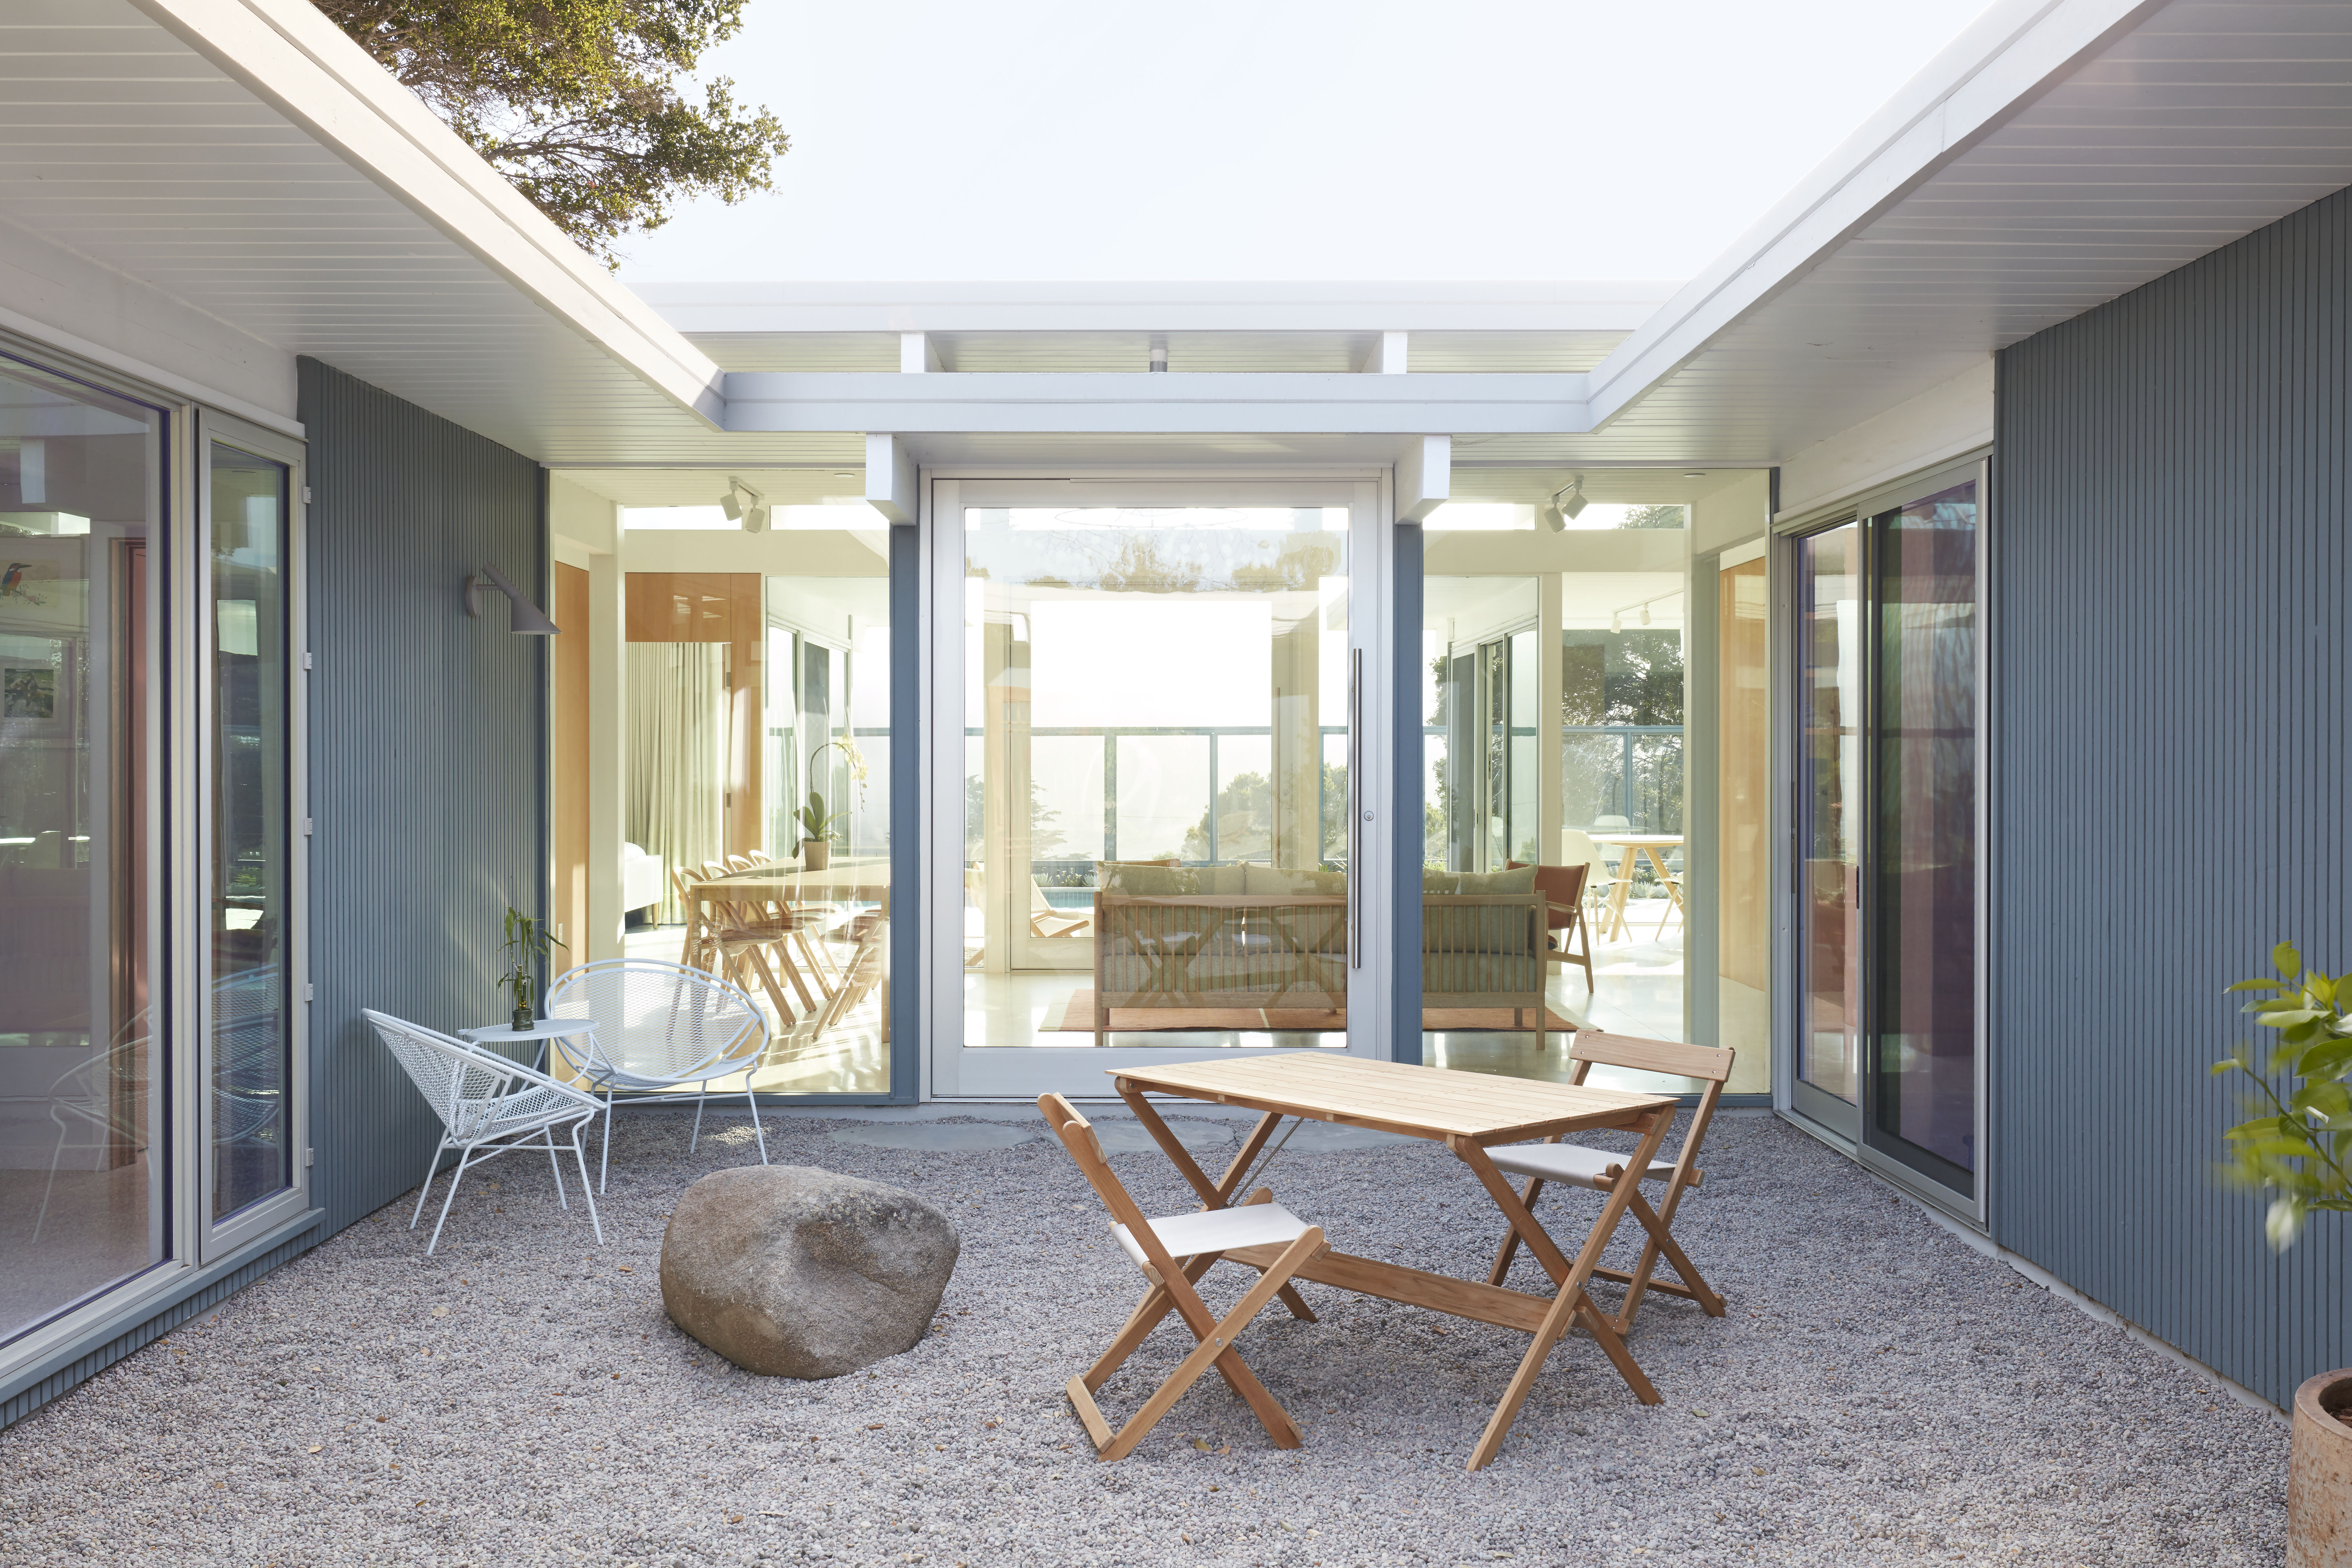 A pivot door surrounded by glass connects the indoor seating area to the outdoors.